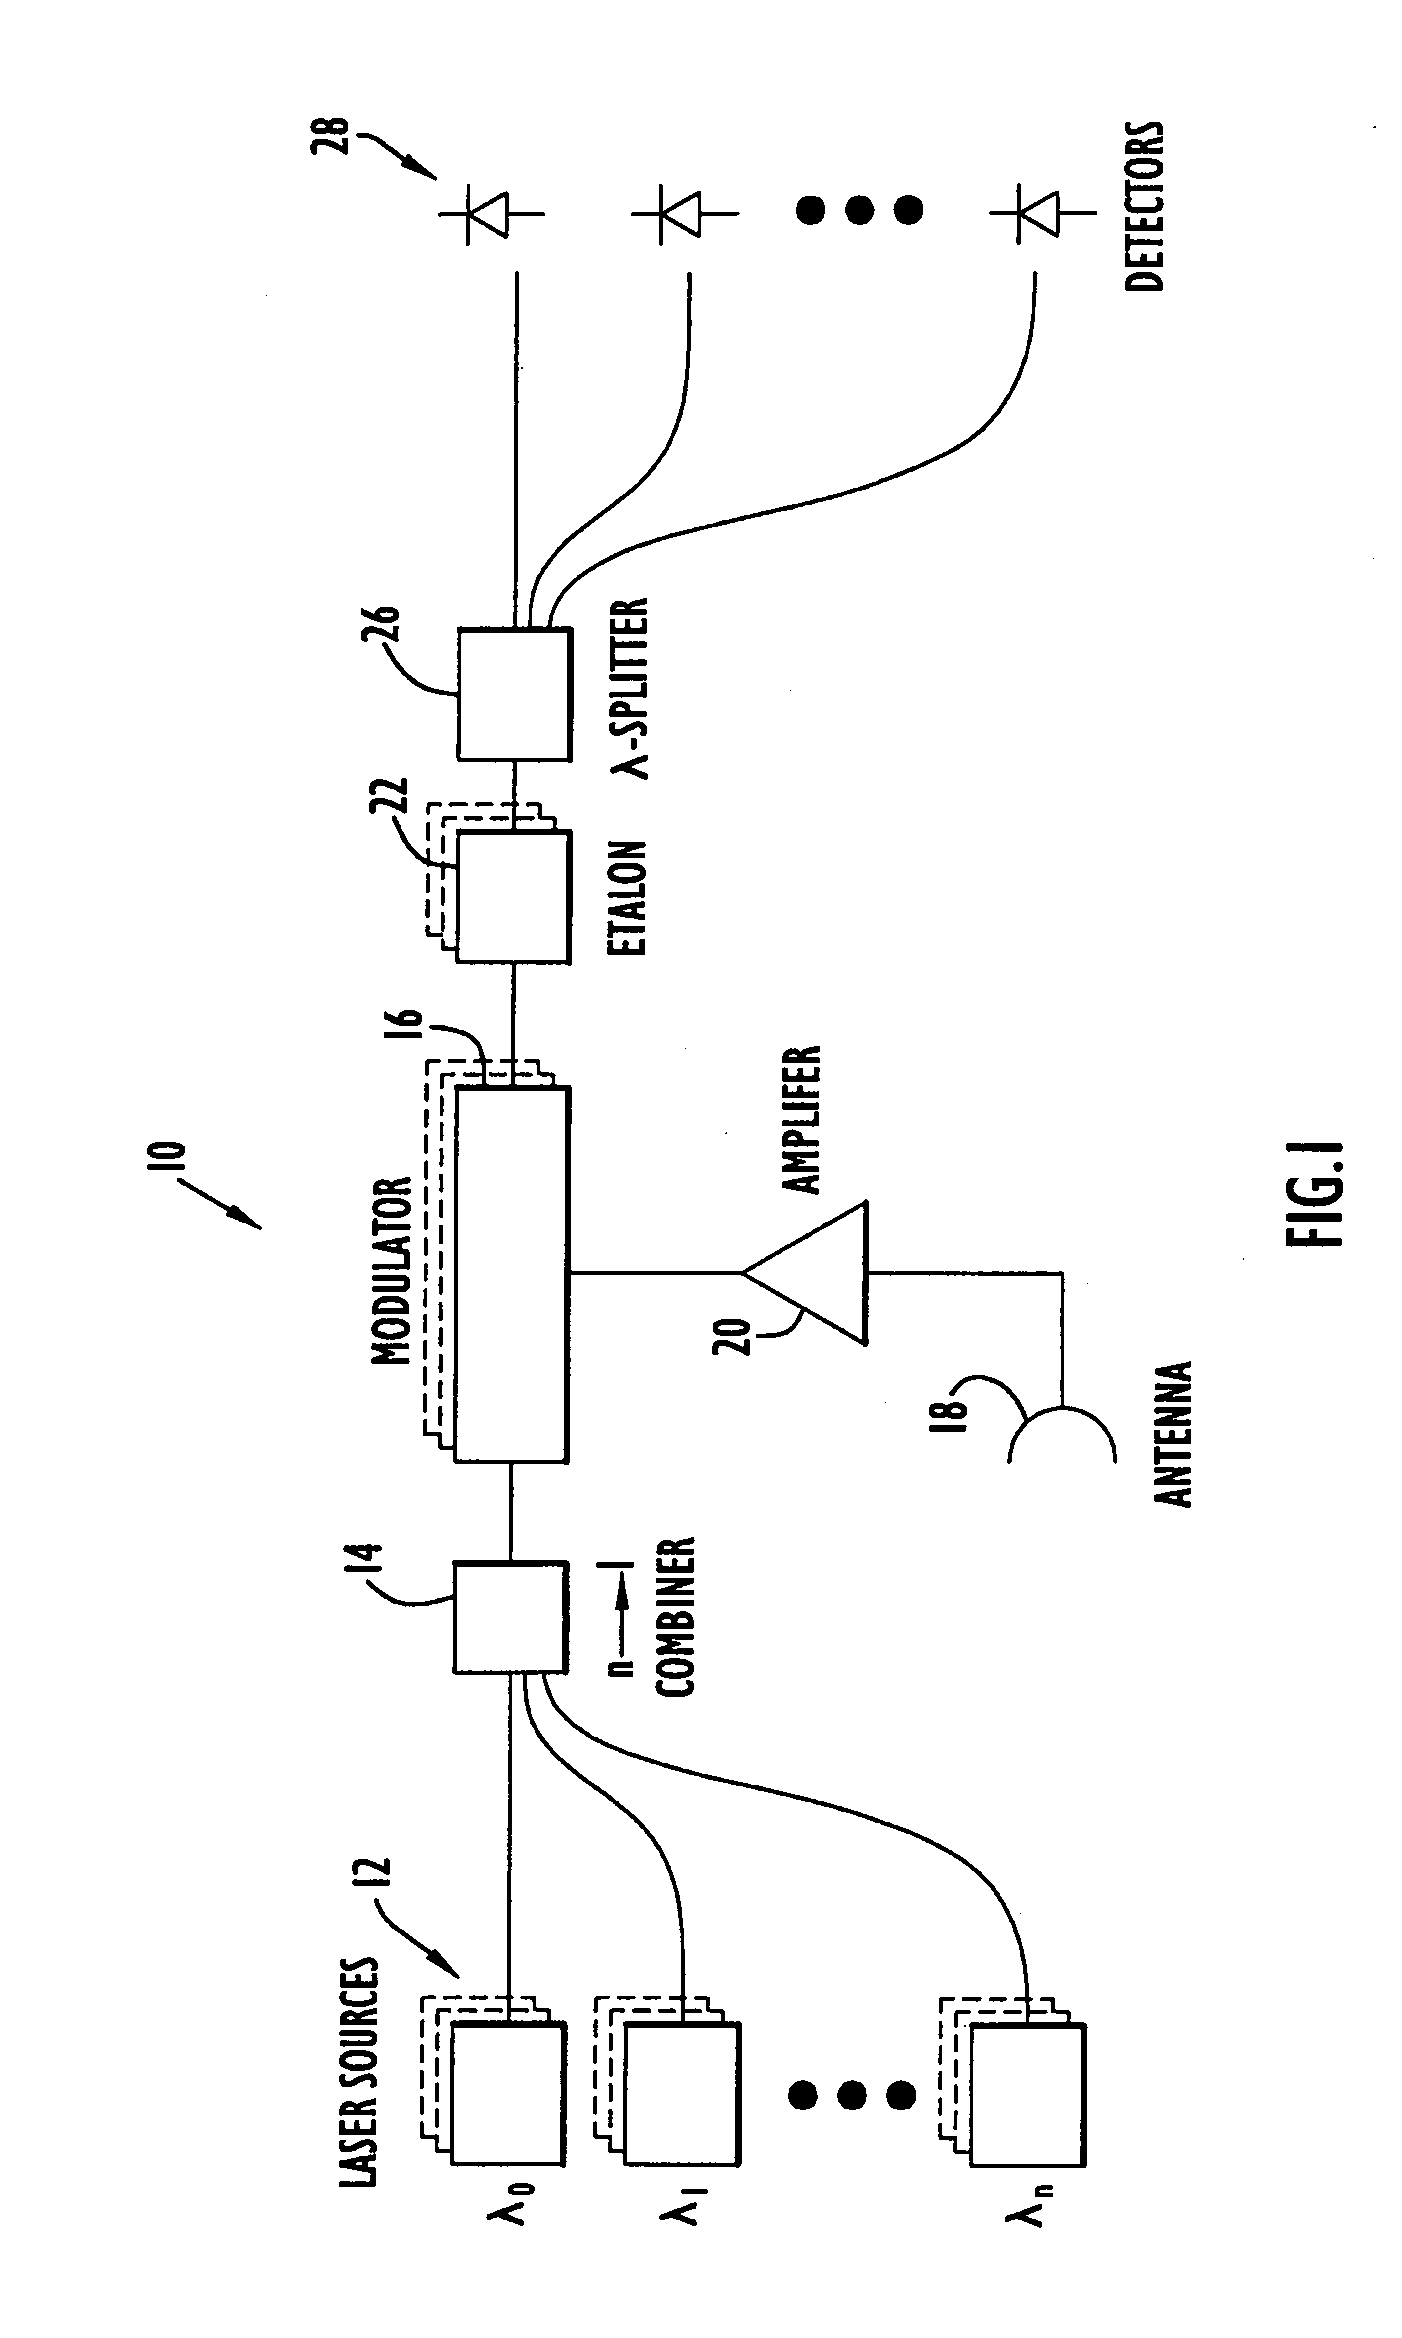 Photonic channelized RF receiver employing dense wavelength division multiplexing